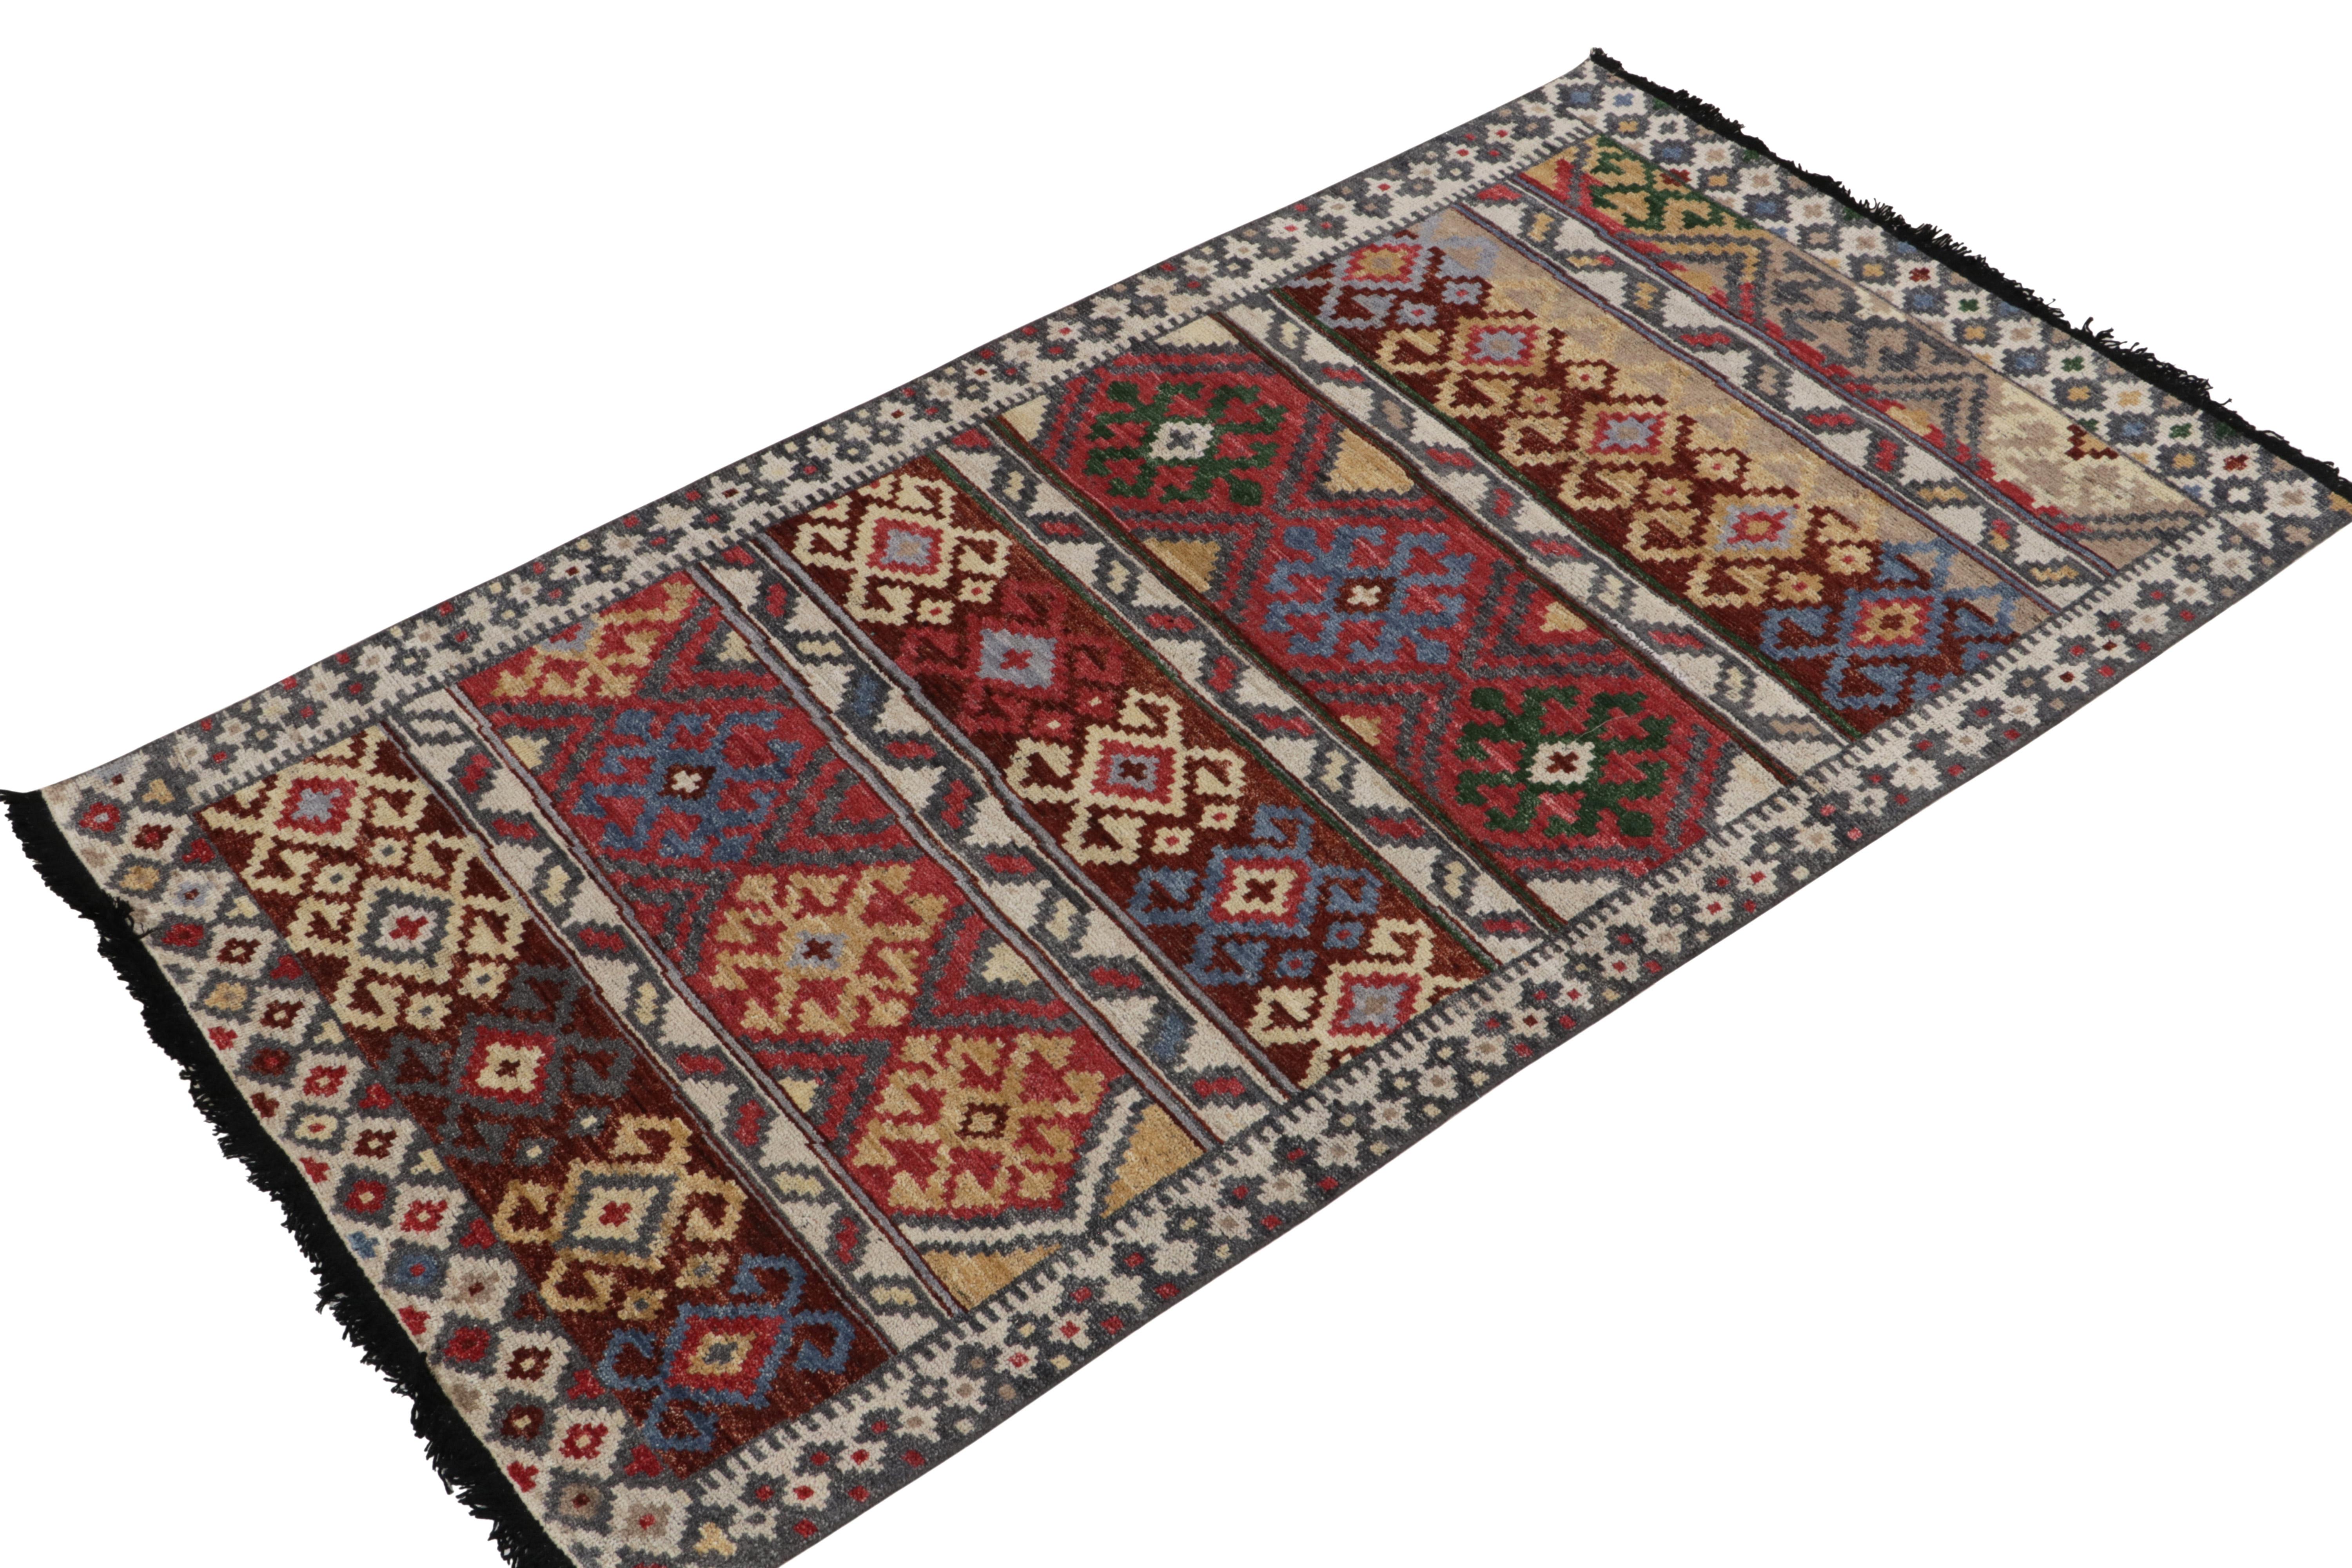 Indian Rug & Kilim's Tribal Style Rug in Off-White, Red and Blue Geometric Pattern For Sale